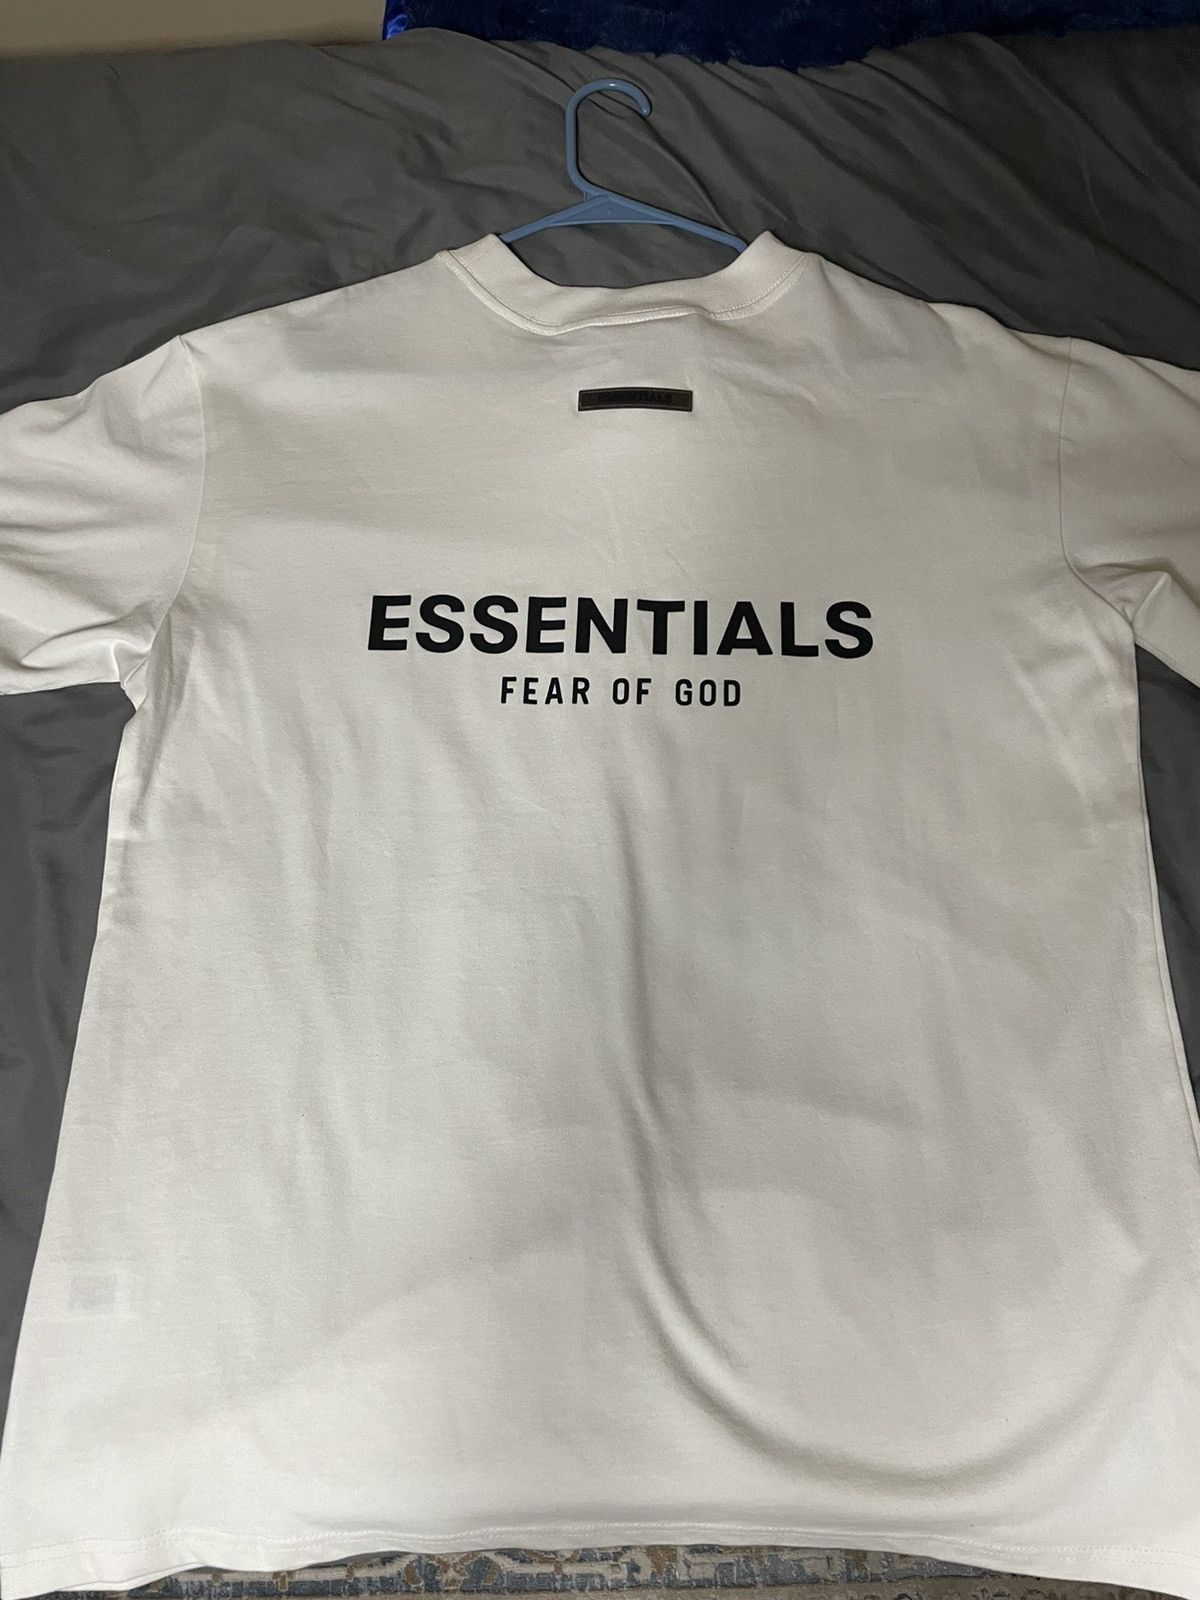 Fear of God Oversized Fear of God Essentials White T-Shirt | Grailed